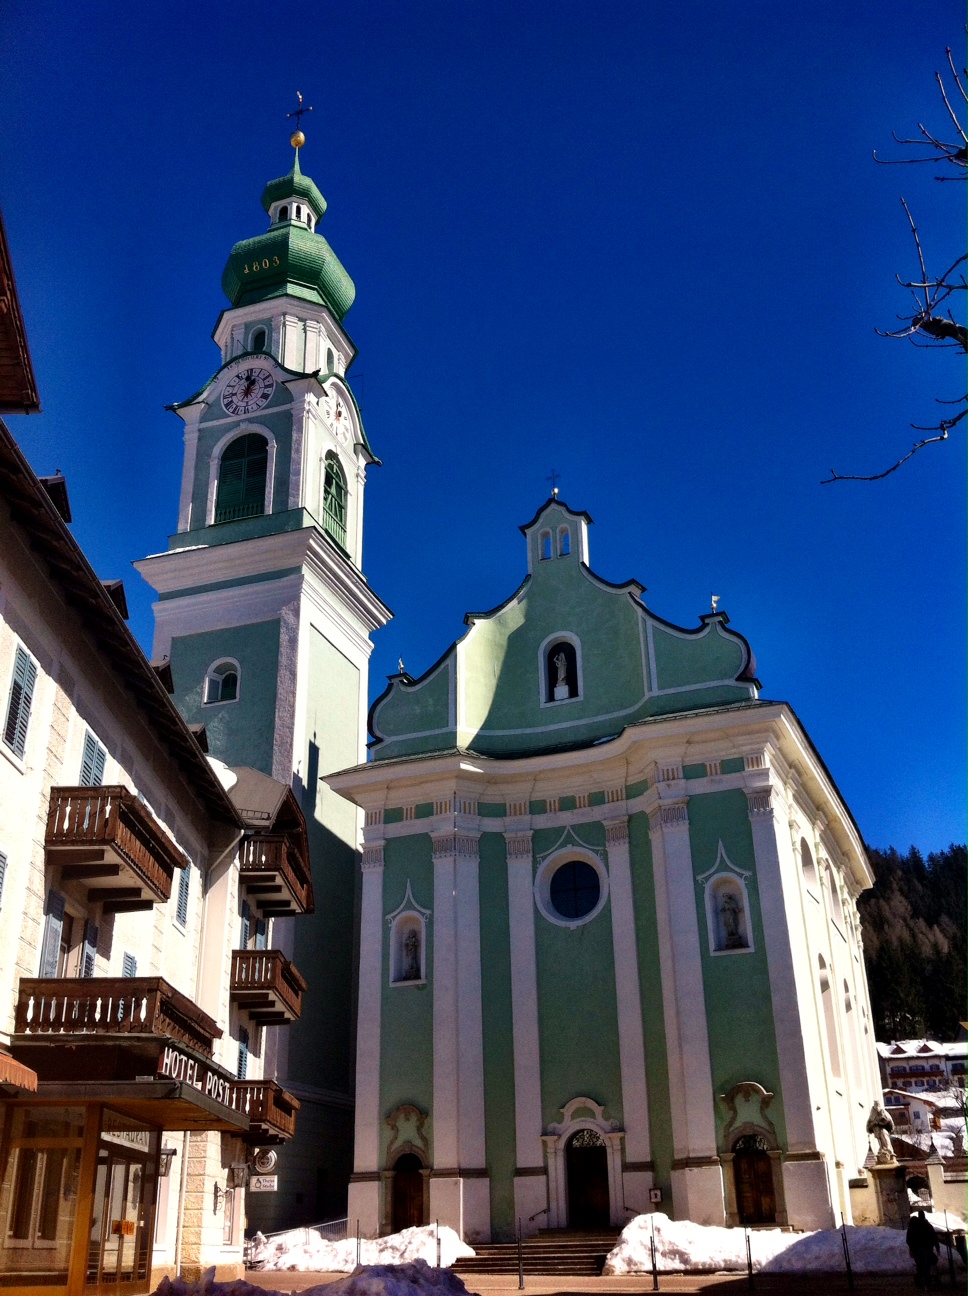 Toblach in the South Tyrol